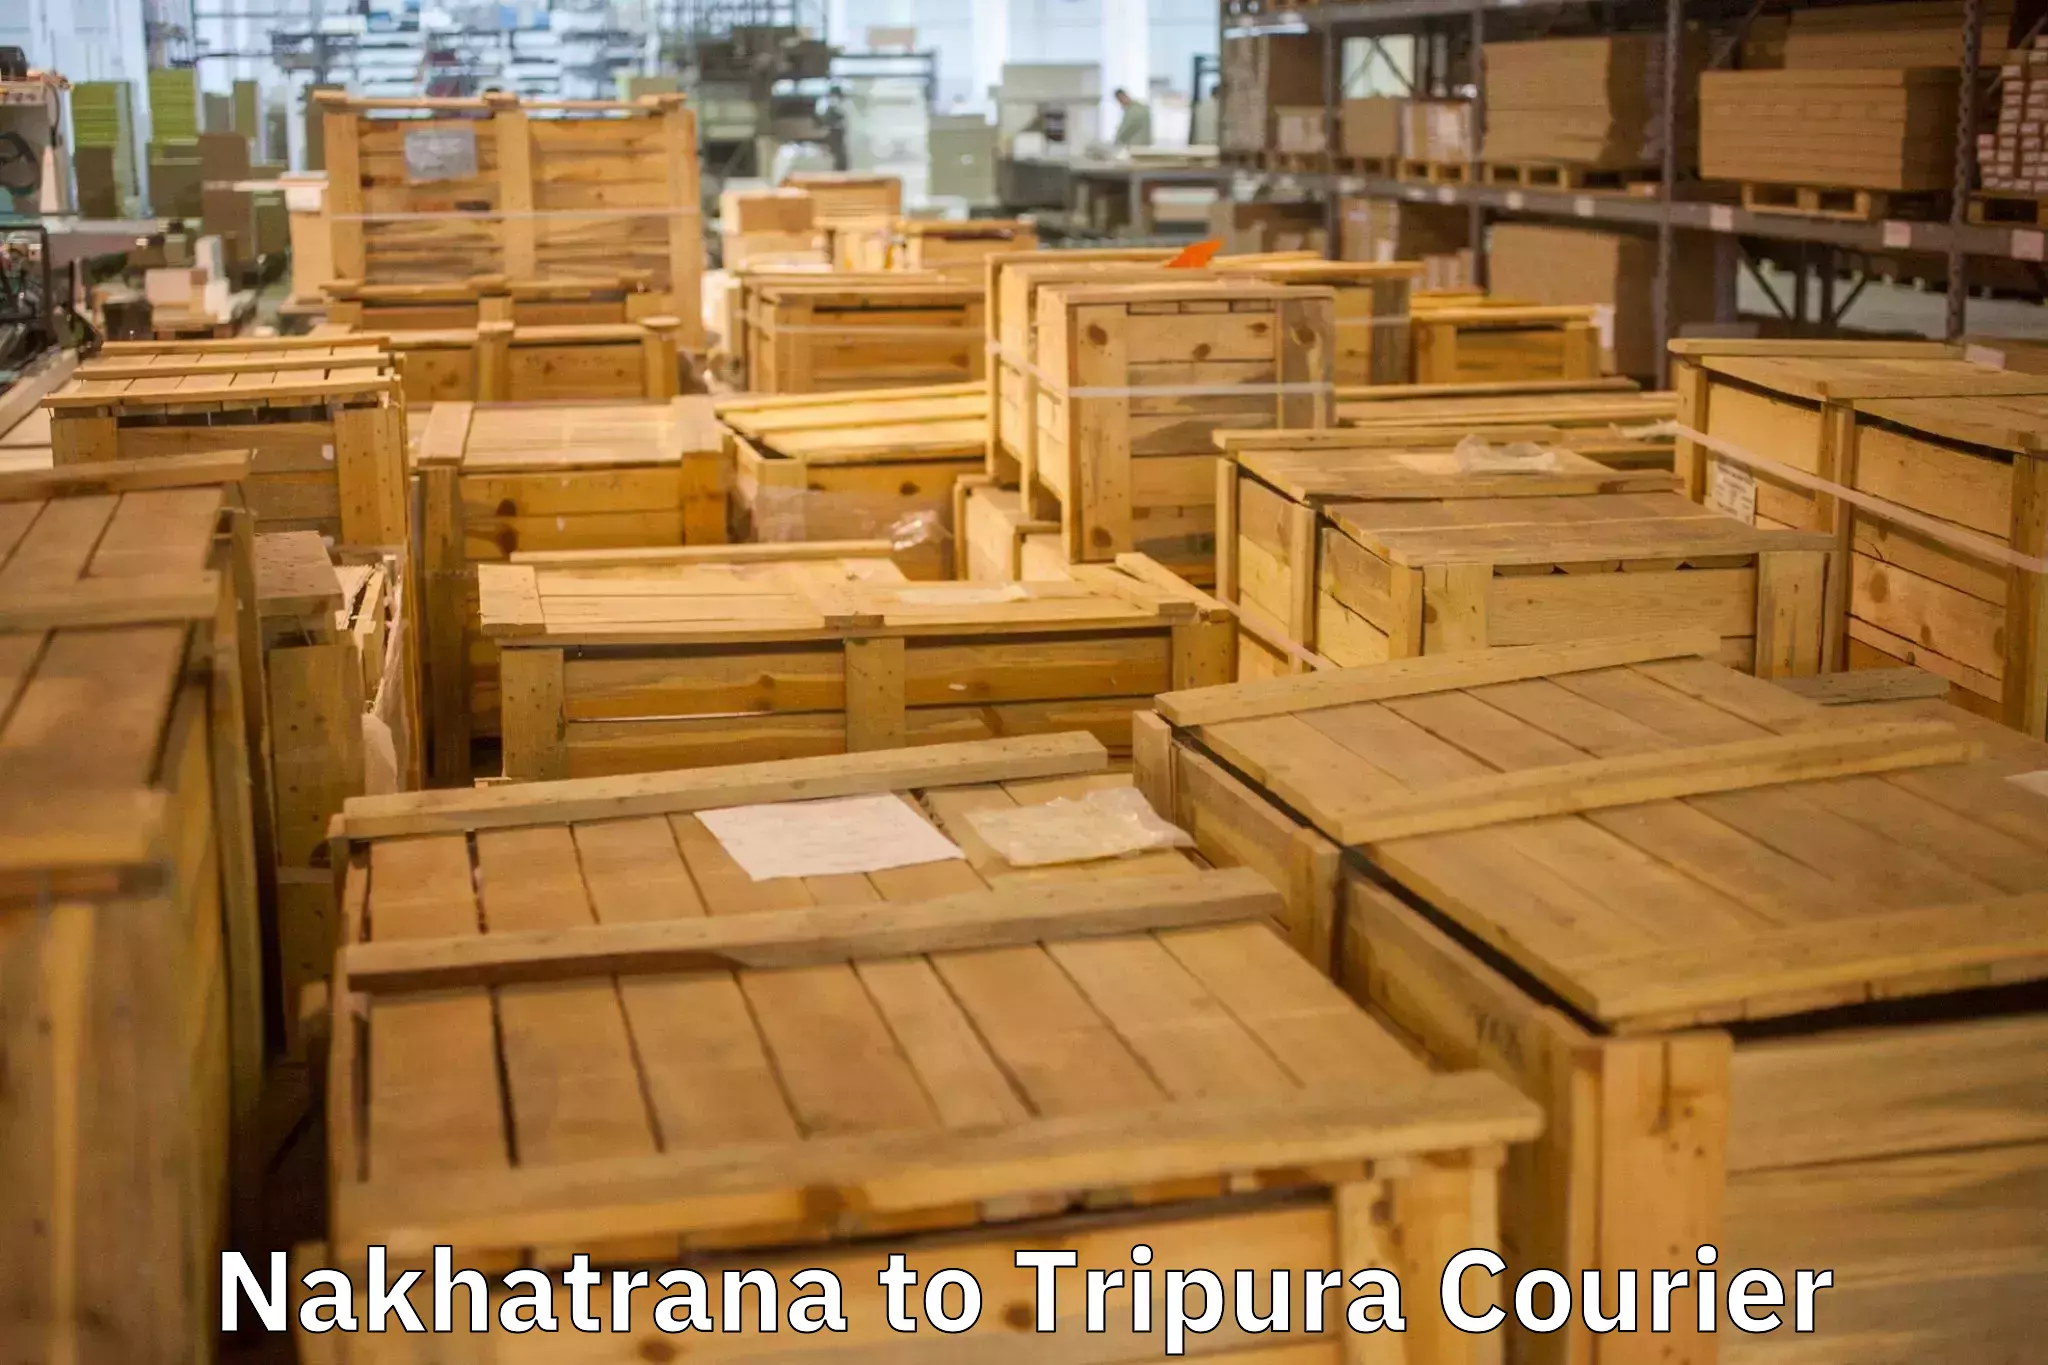 Furniture moving specialists in Nakhatrana to Udaipur Tripura